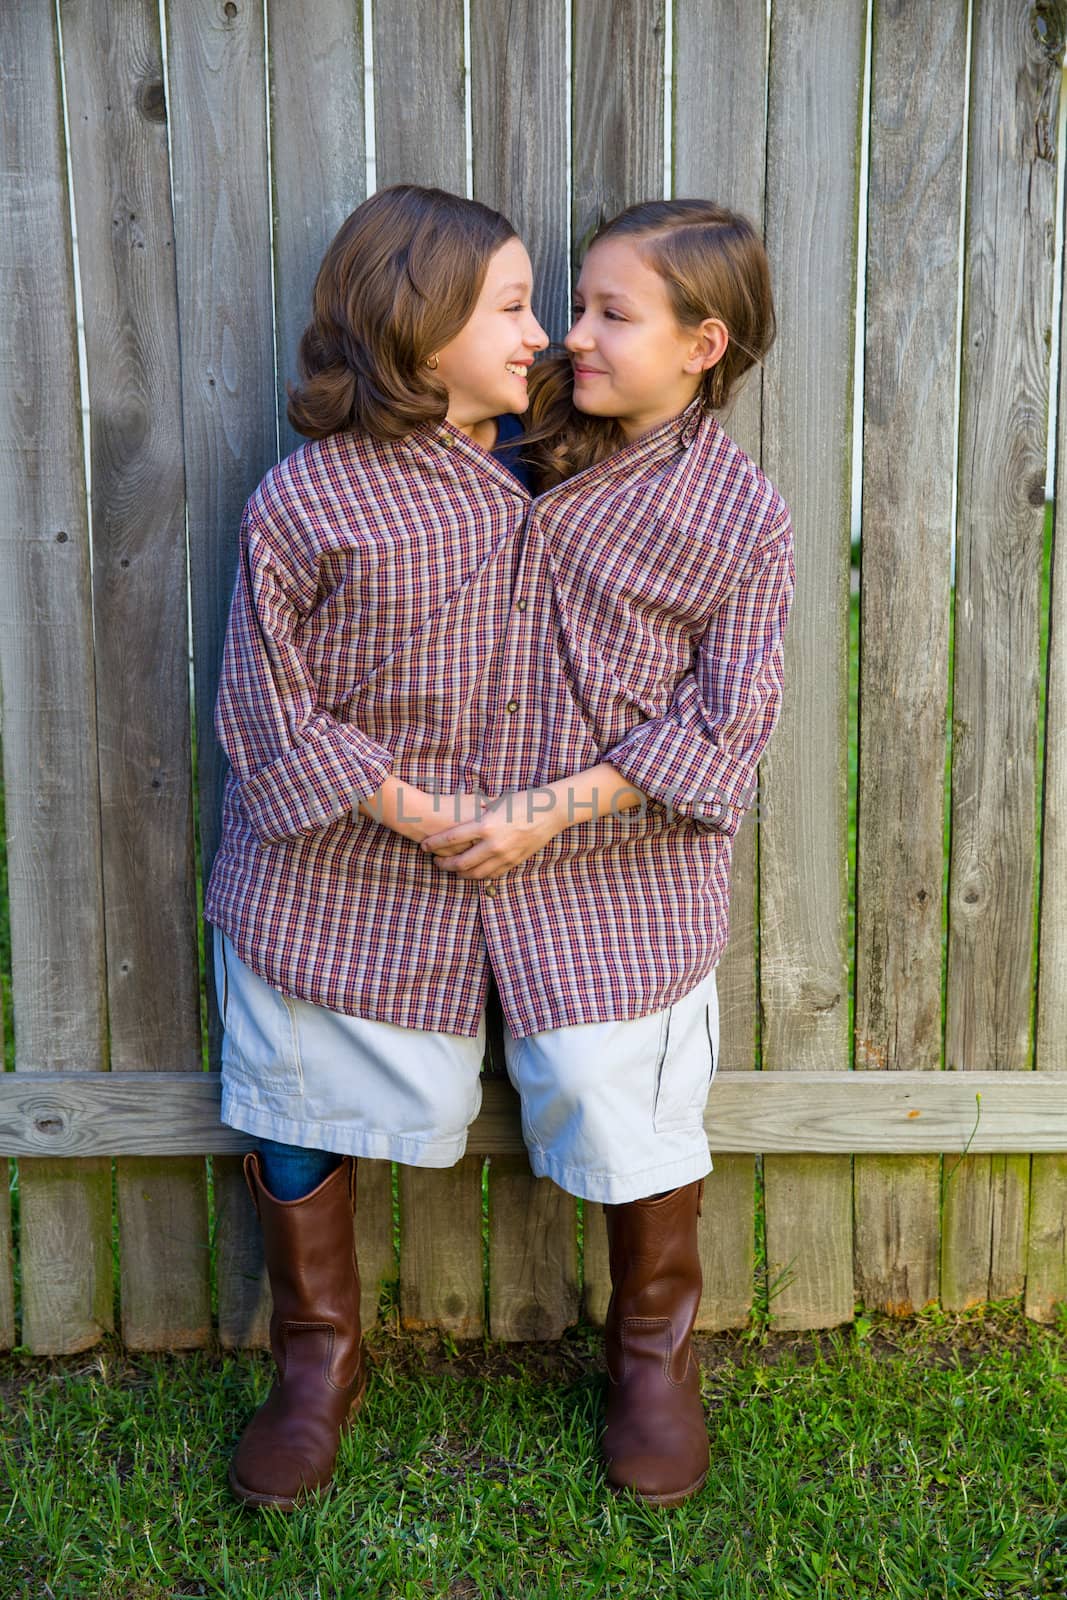 twin girls fancy dressed up pretending be siamese with his father shirt looking eachother